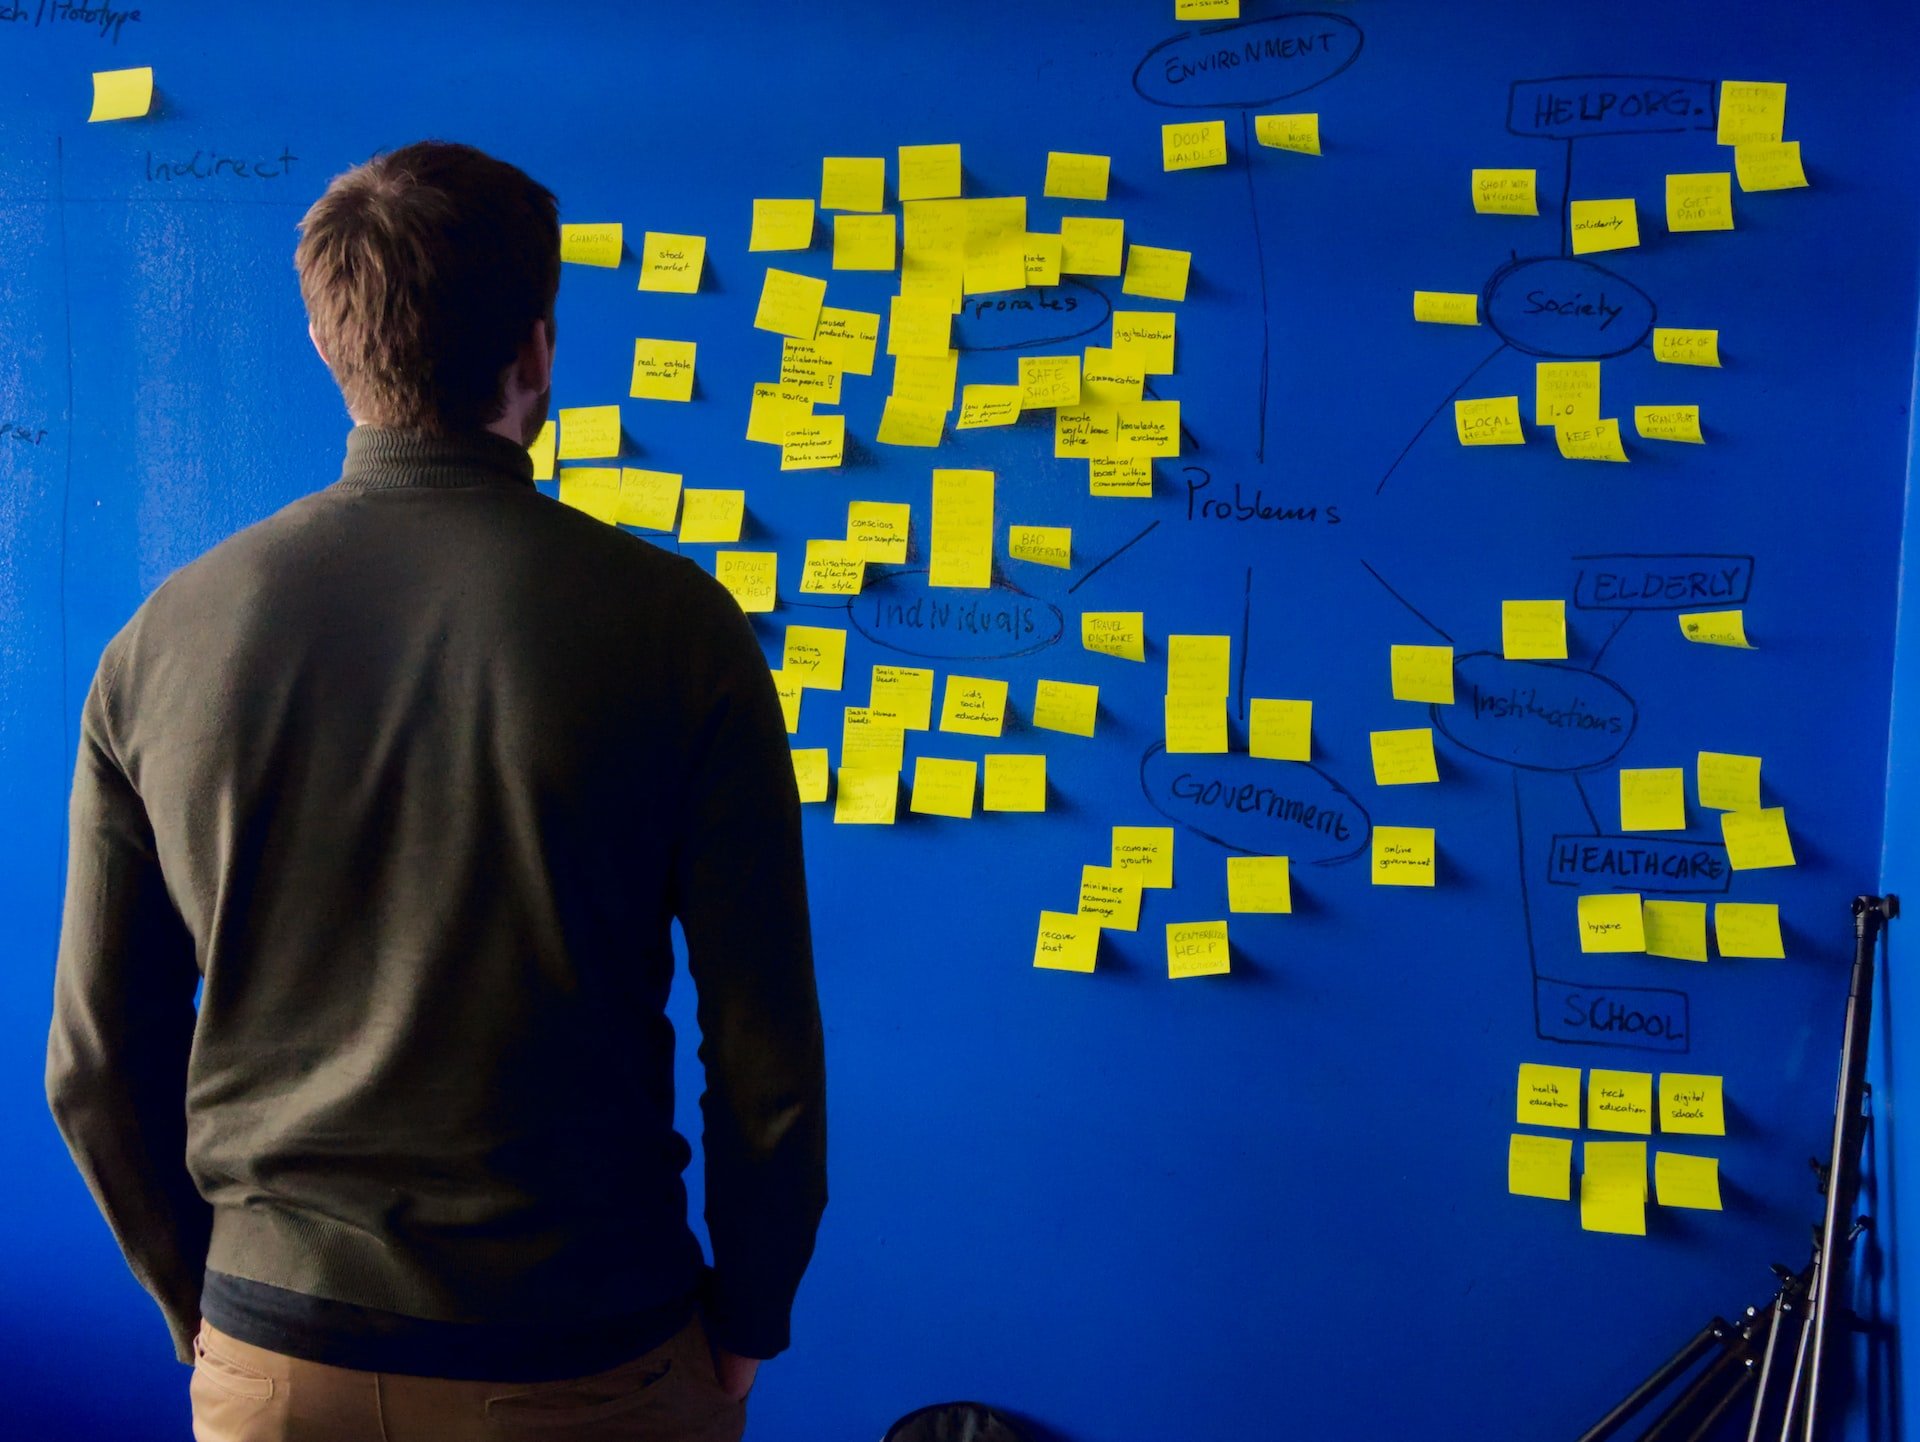 Depicts a man staring at a board filled with sticky notes from a brainstorming session. Used as a cover image for an article on StartEngine alternatives.